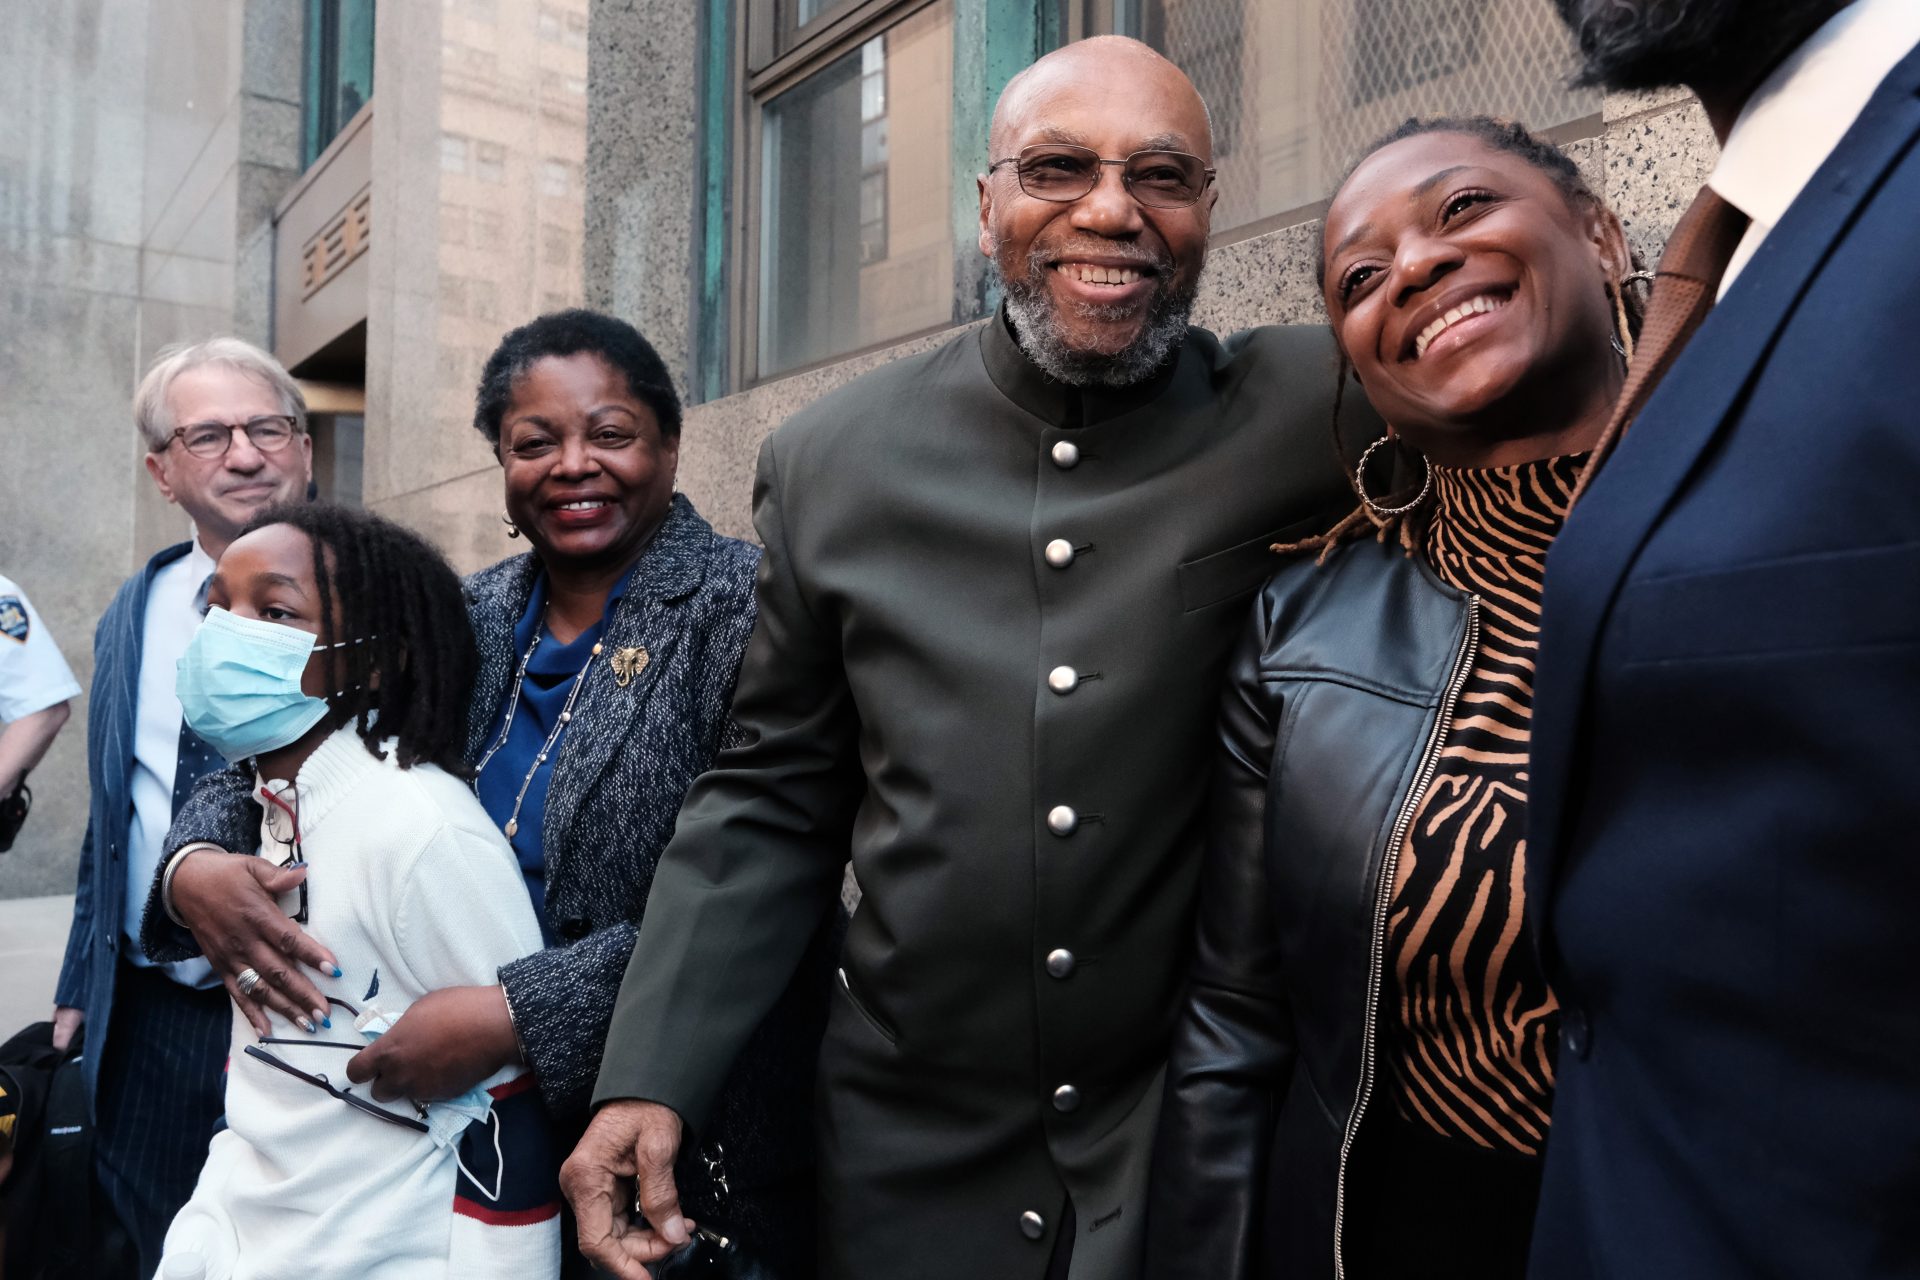 Man Exonerated In Malcolm X Killing Suing NYC For $40 Million After Spending 20 Years in Prison